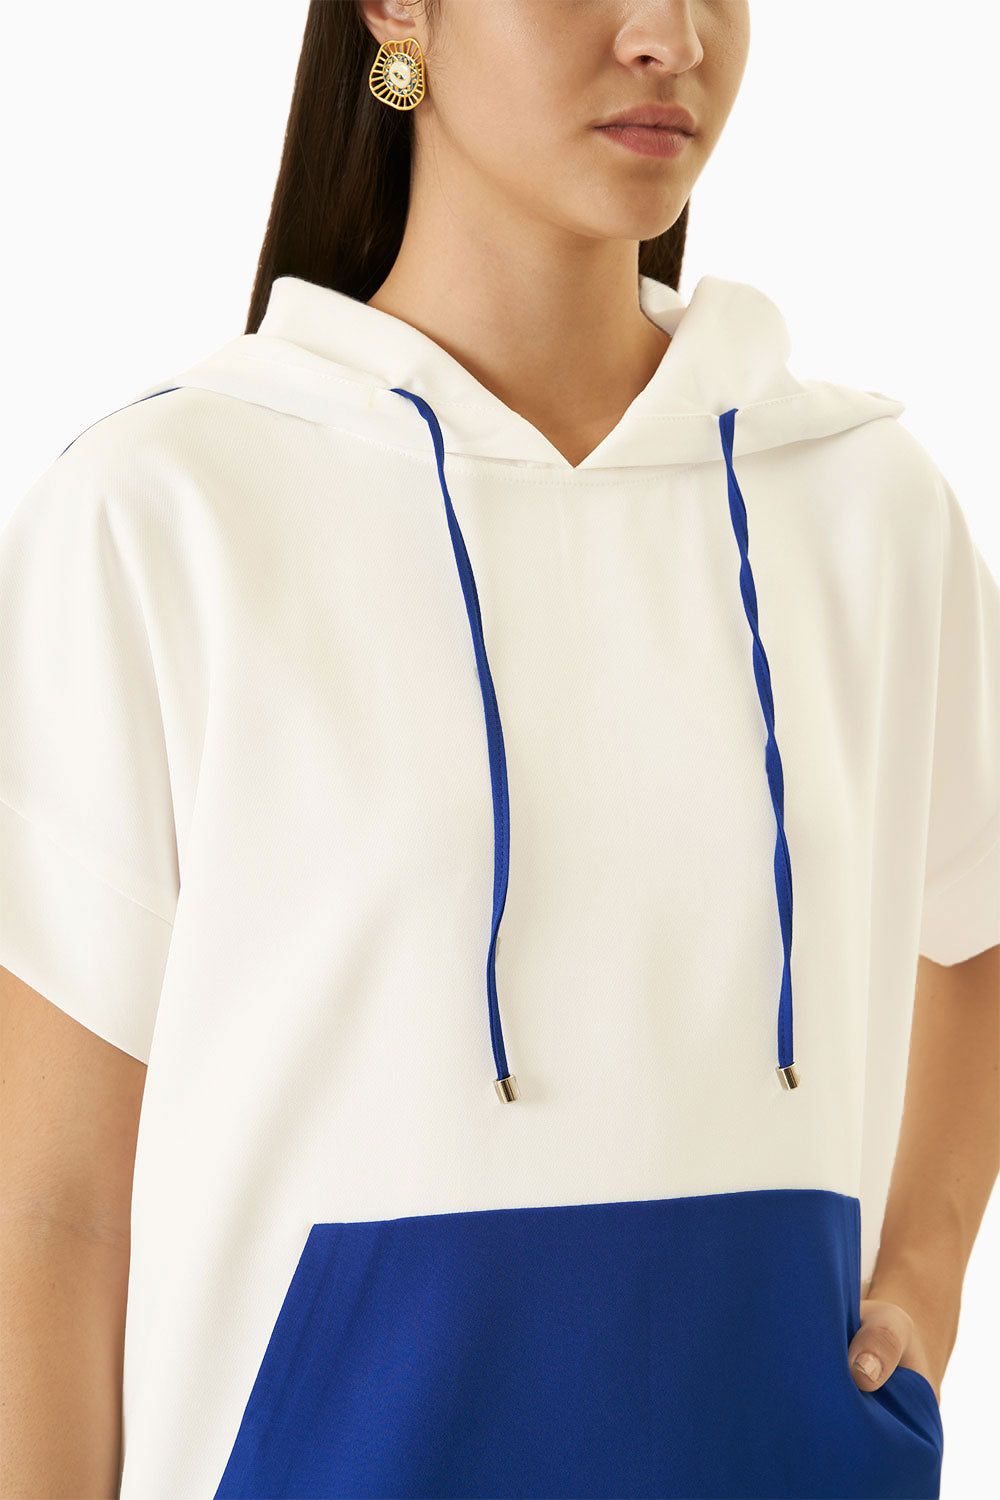 White and Royal Blue Milan Track Suit